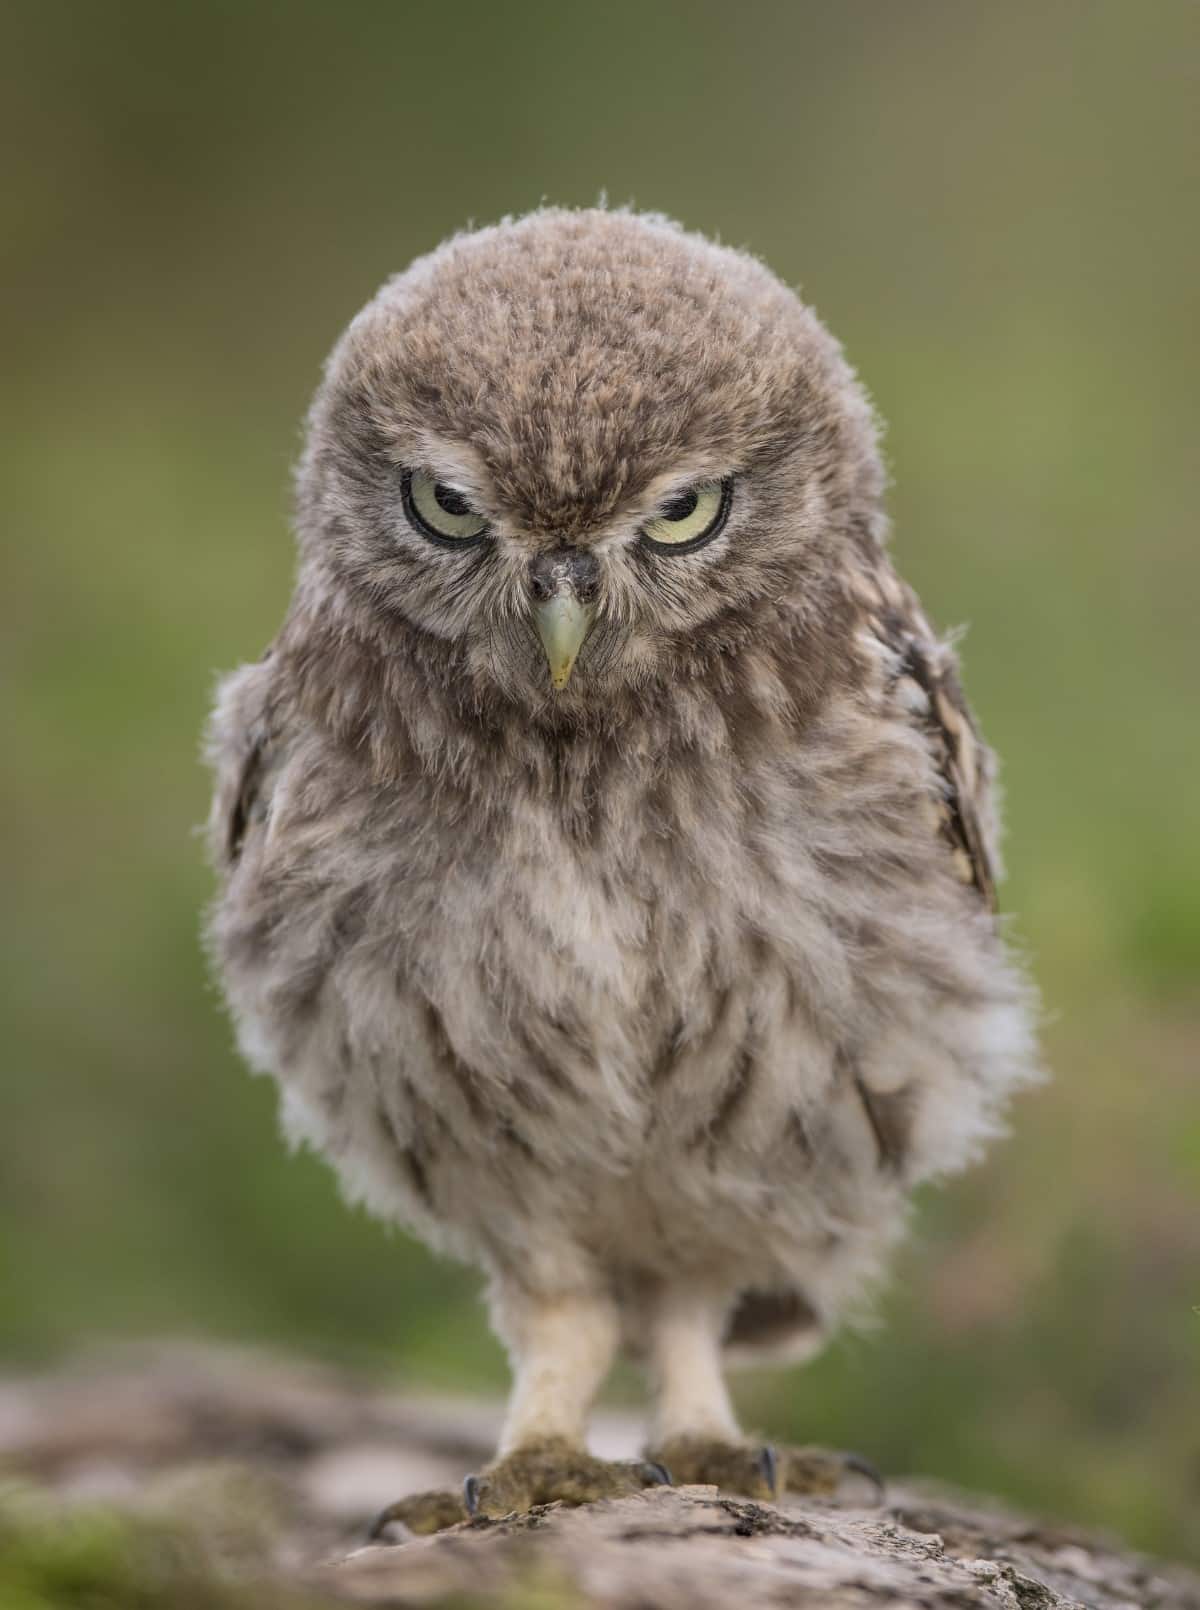 Little owl staring at the camera